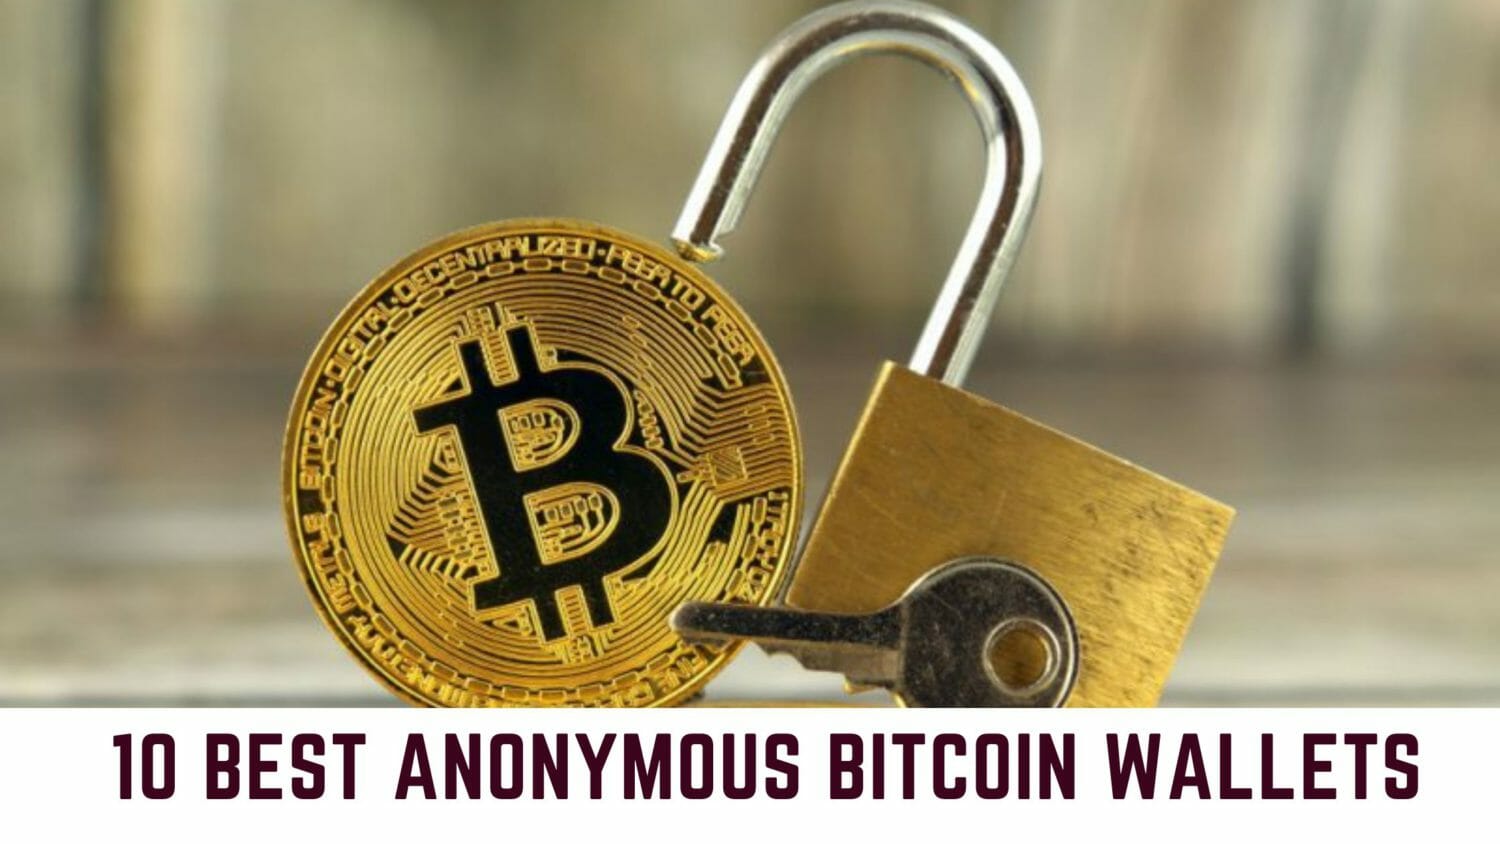 How Anonymous is Bitcoin?